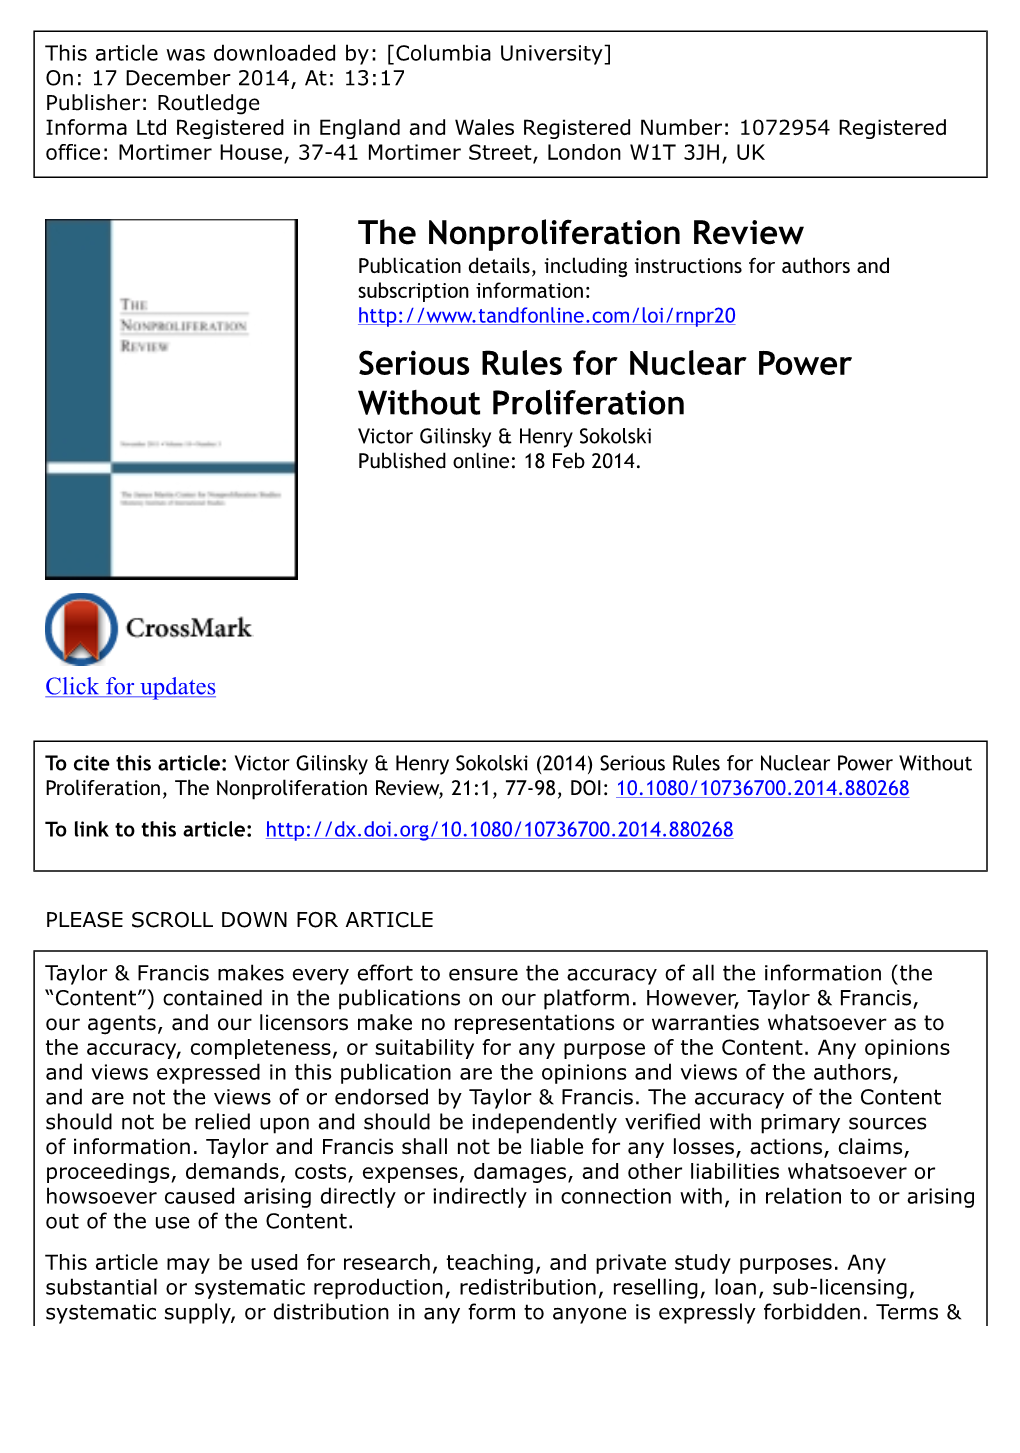 Serious Rules for Nuclear Power Without Proliferation Victor Gilinsky & Henry Sokolski Published Online: 18 Feb 2014